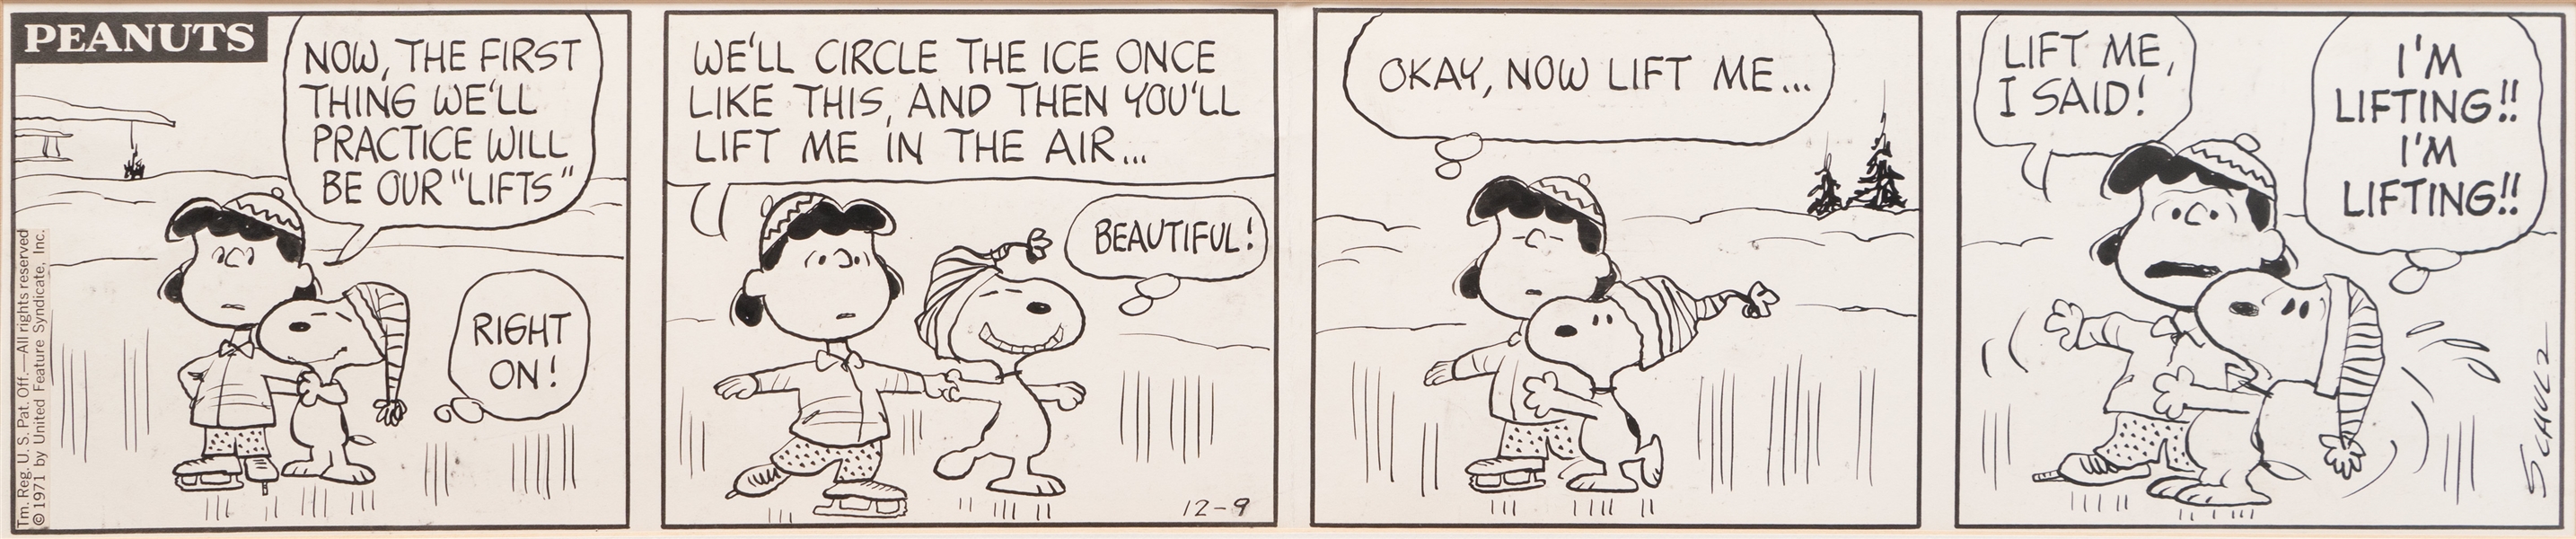 Original Charles Schulz ''Peanuts'' Comic Strip from 1971 -- Snoopy & Lucy Form an Unlikely Ice Skating Duo